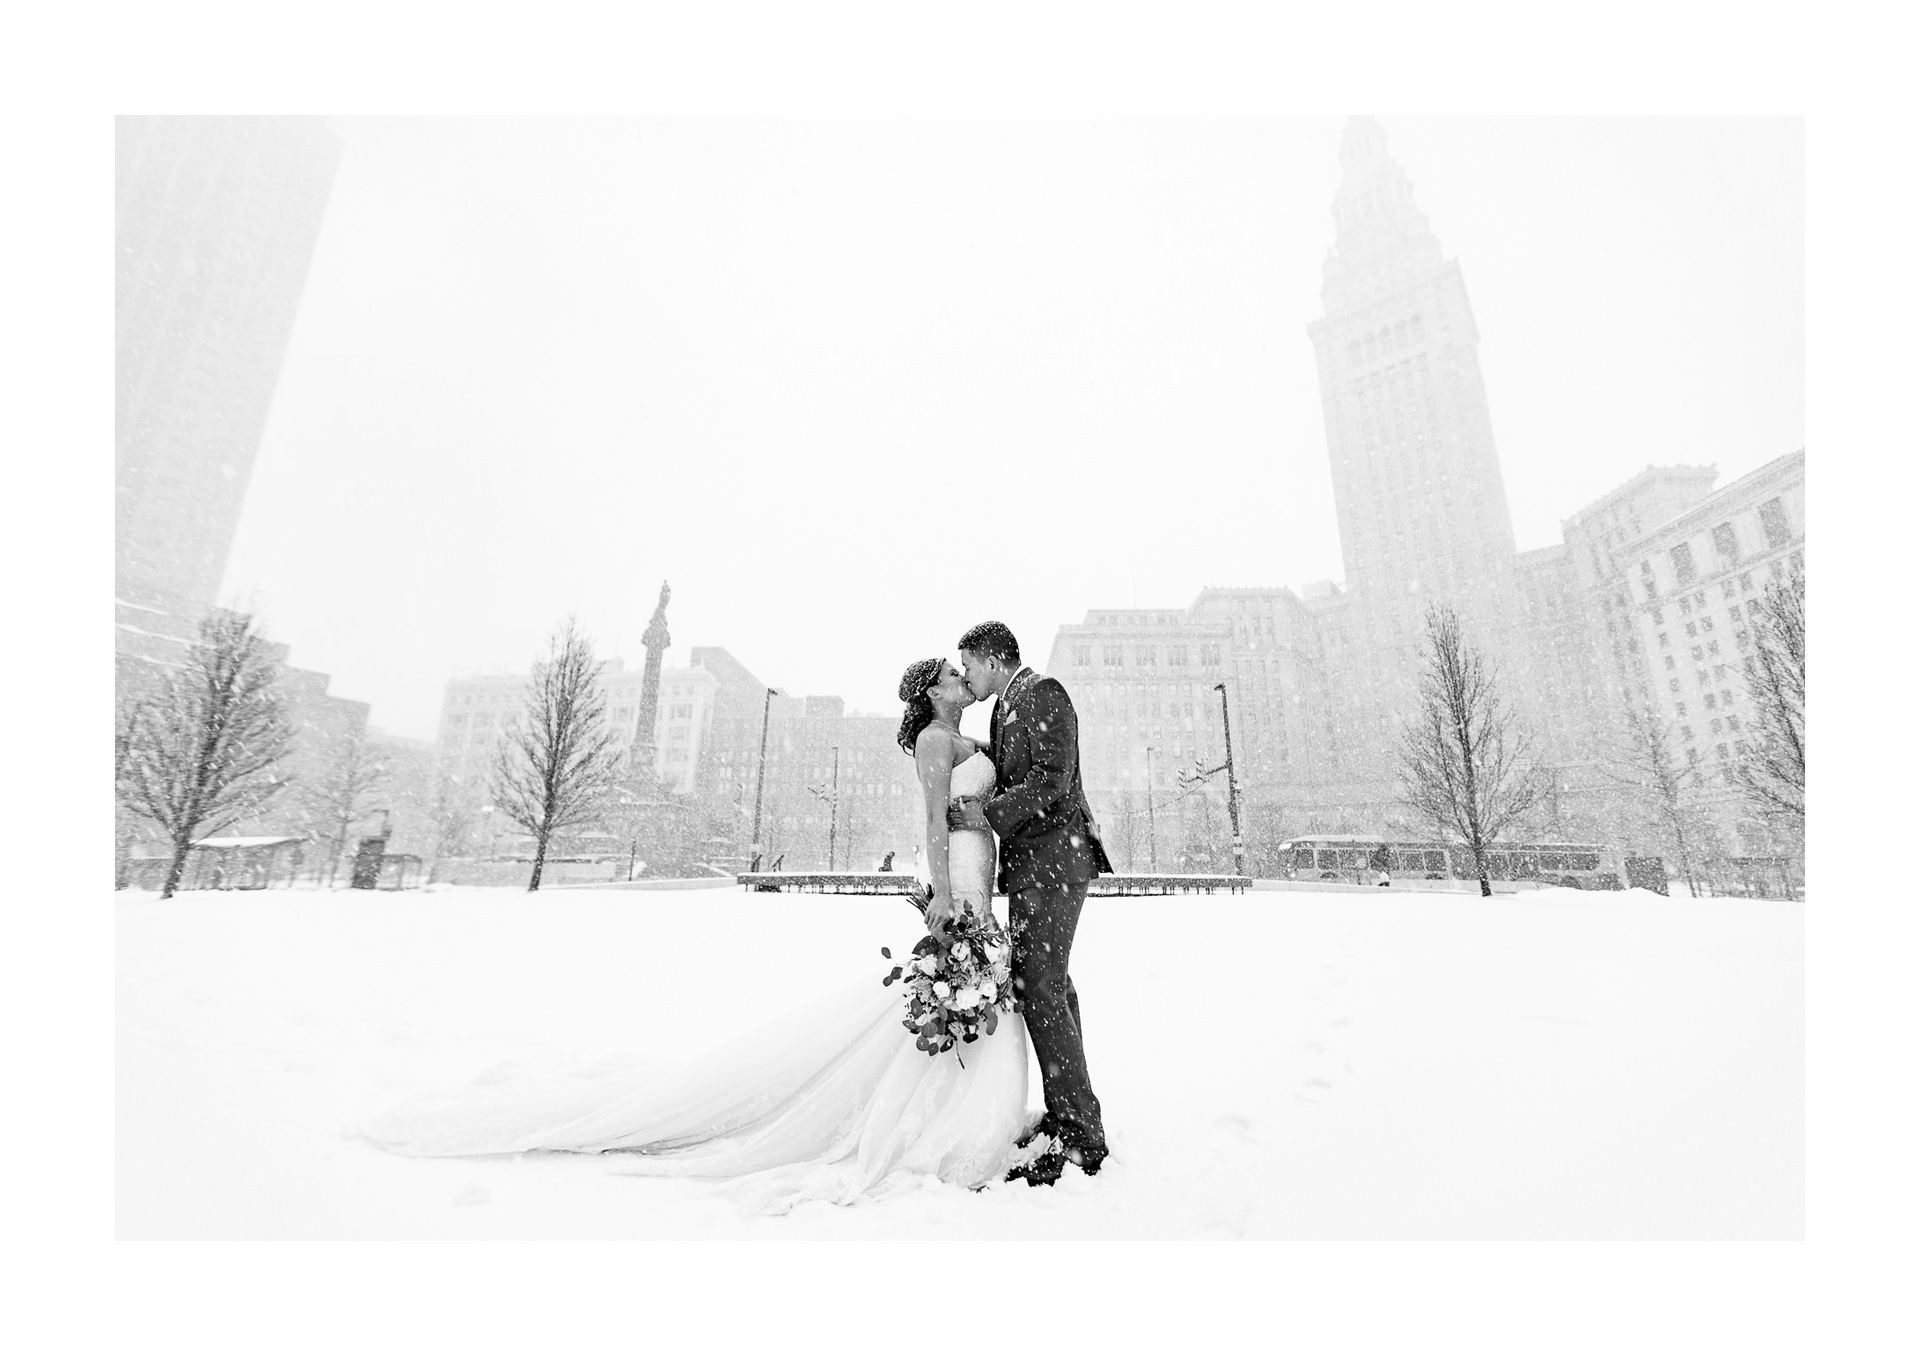 Windows on the River Winter Wedding Photographer in Cleveland 65.jpg